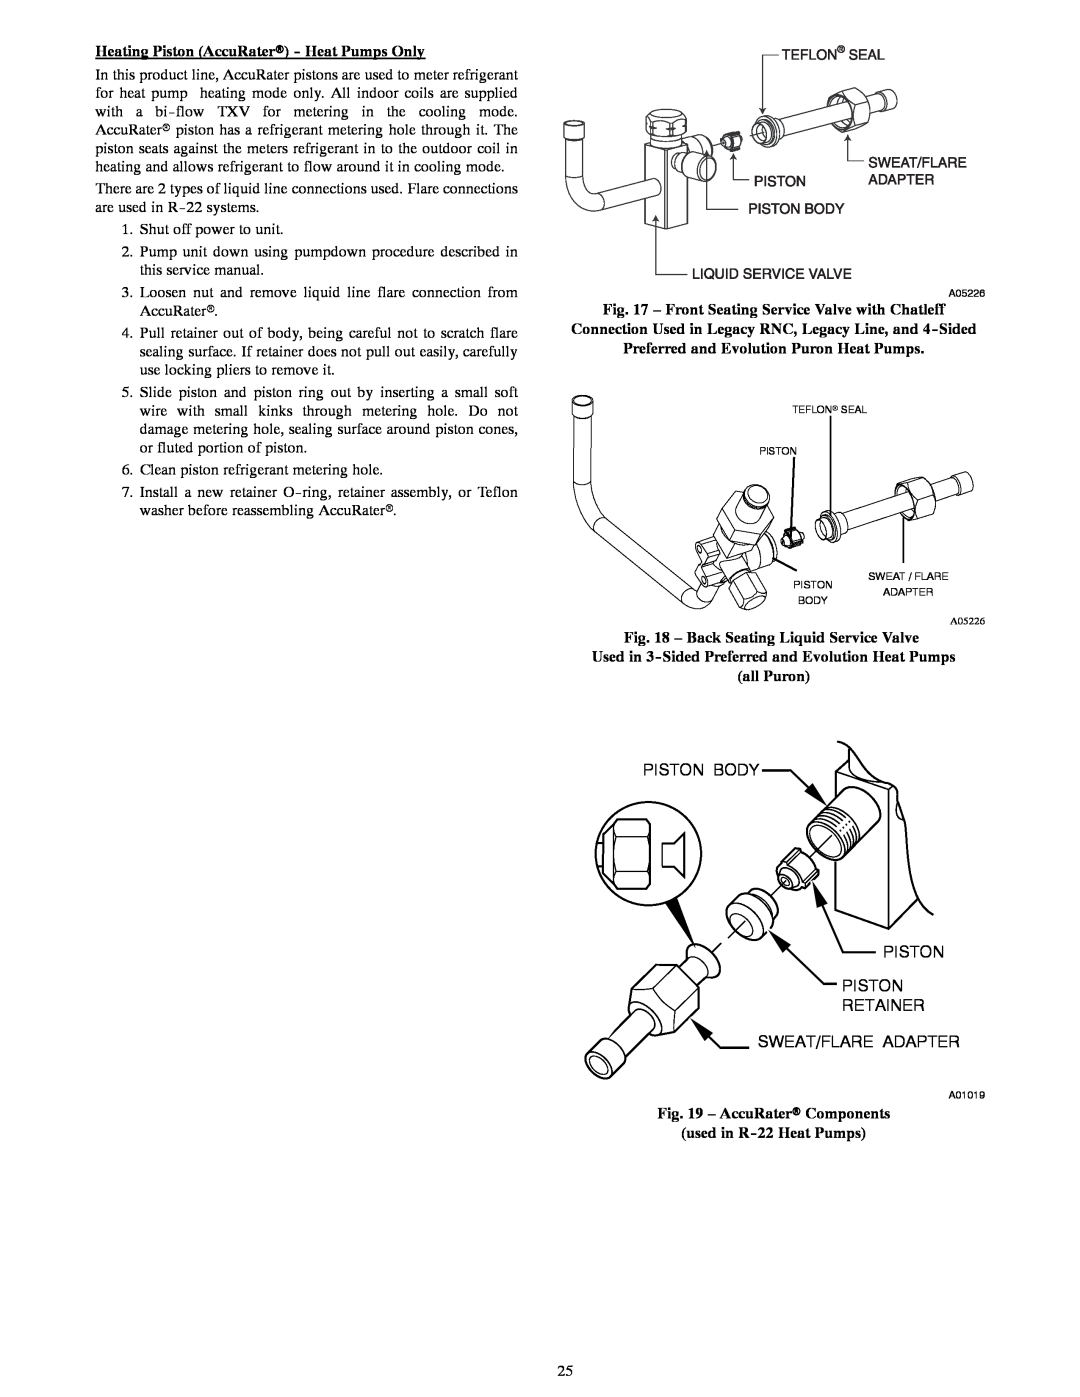 Bryant R-22 service manual Heating Piston AccuRaterr - Heat Pumps Only, Preferred and Evolution Puron Heat Pumps, all Puron 